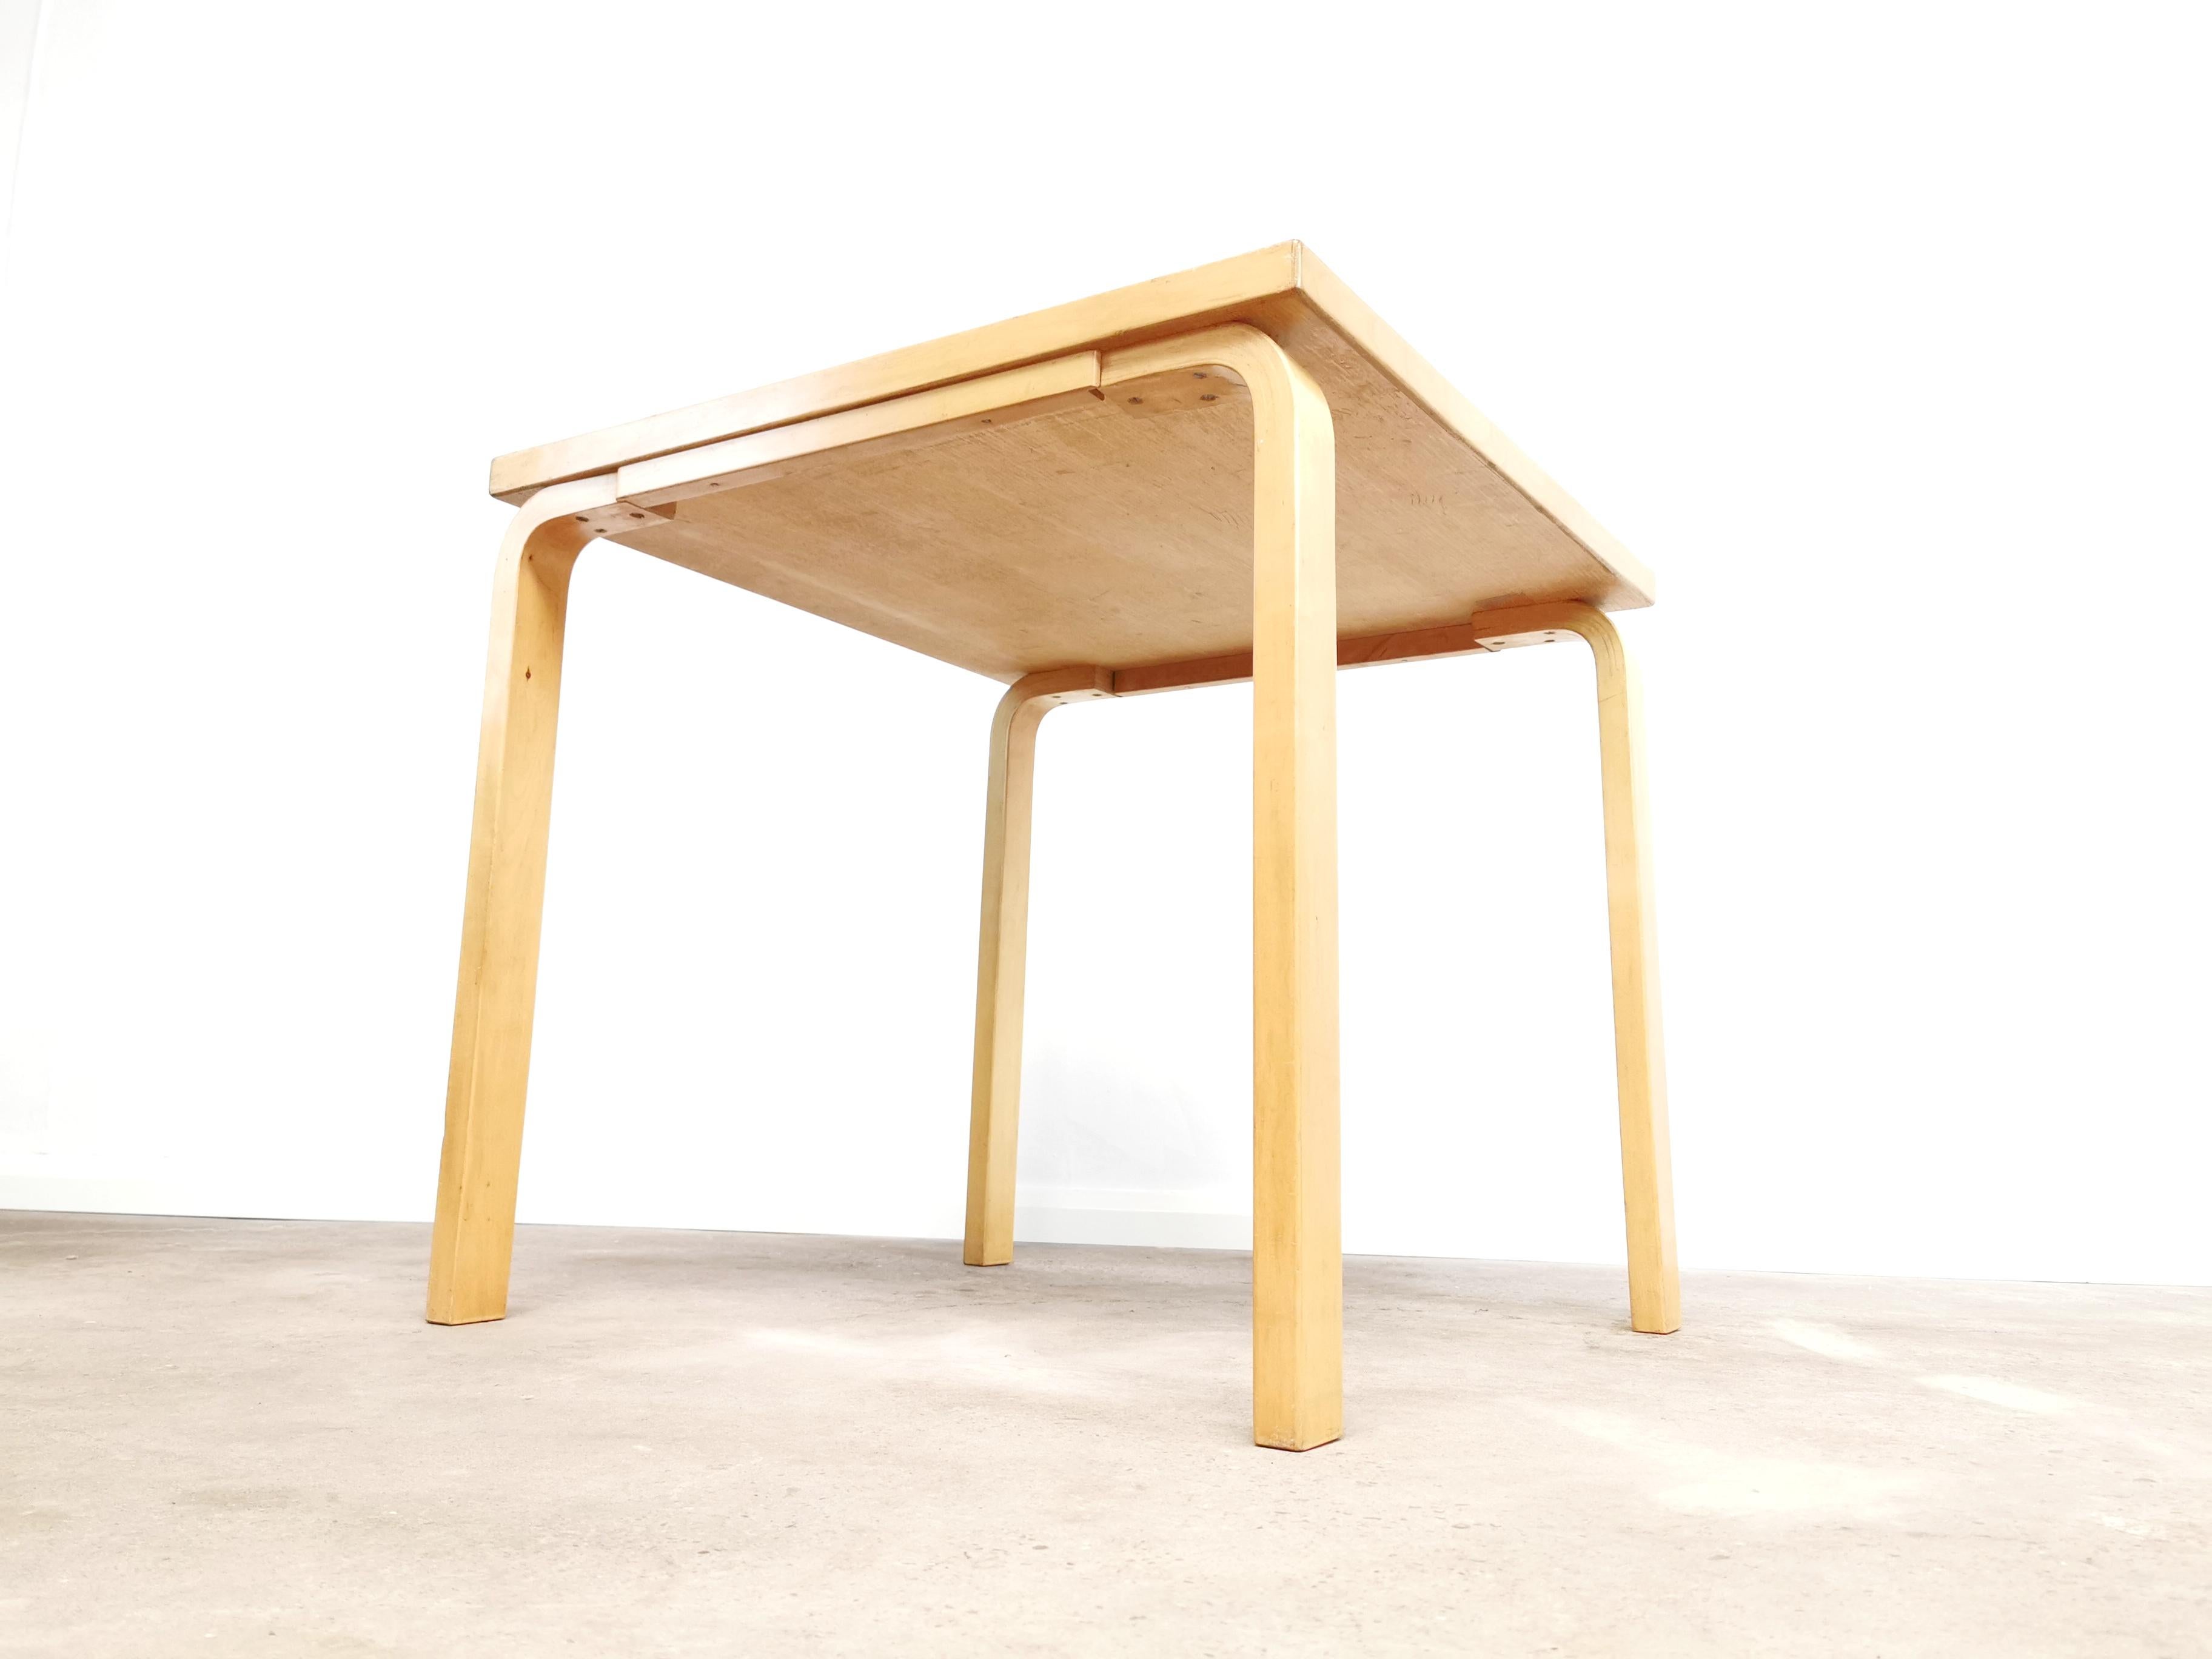 Table by Alvar Aalto for Artek. The primary material of this square table is solid birch.

Artek tables are based on different combinations of Alvar Aalto’s L-legs and tabletops. Aalto introduced the bent L-leg for the first time in 1933, and it